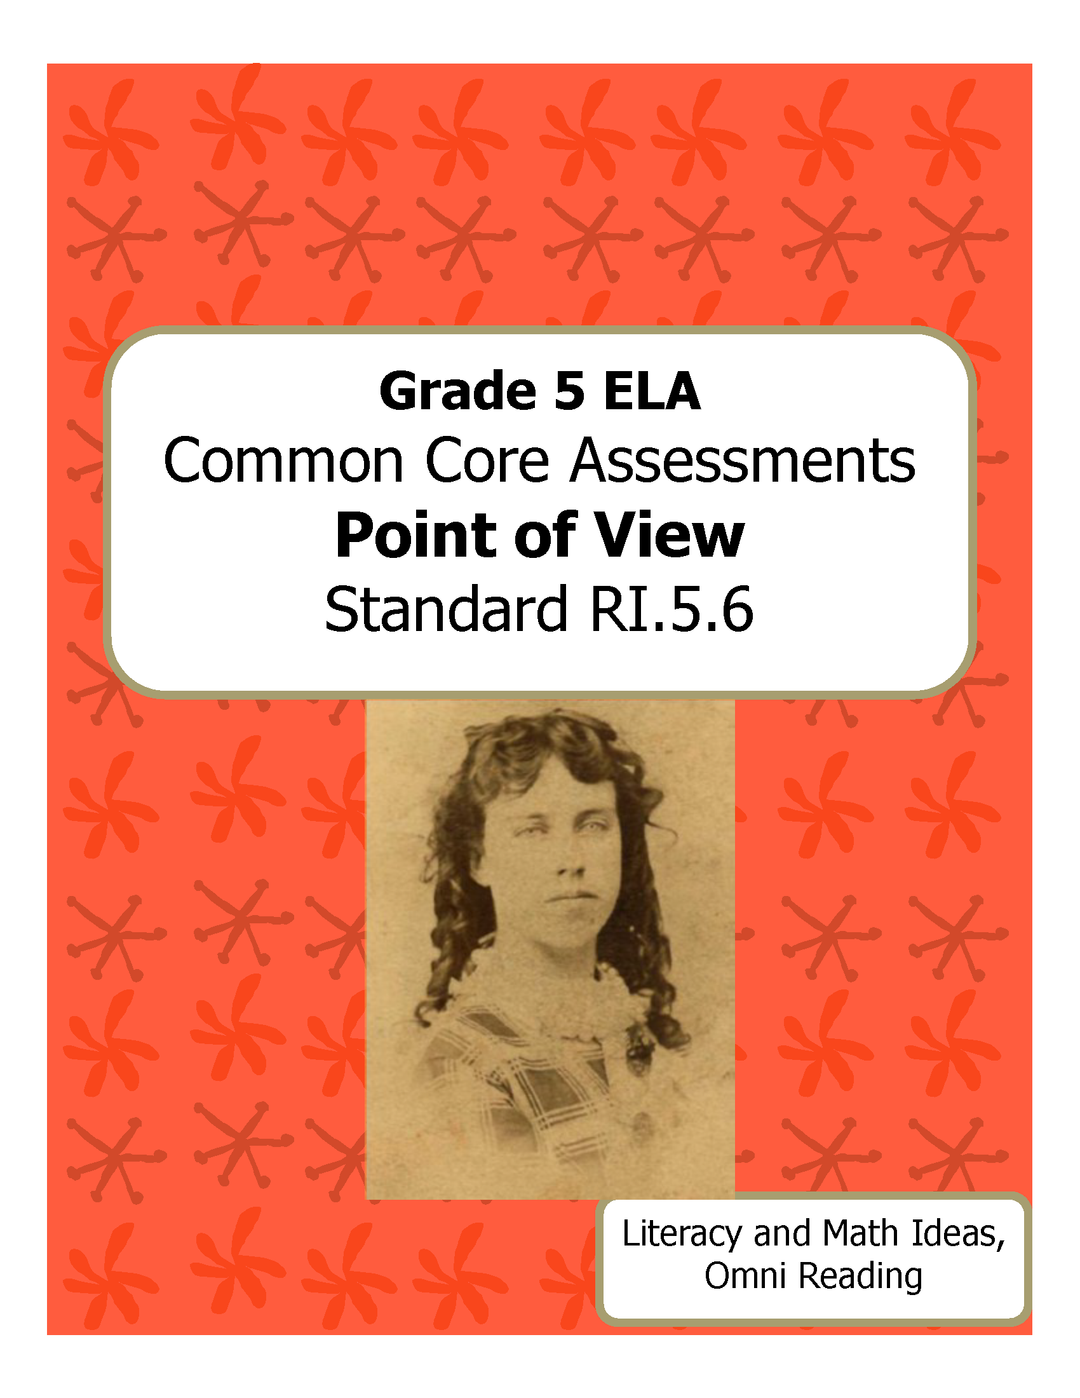 Grade 5 Common Core Assessments: Point of View RI.5.6